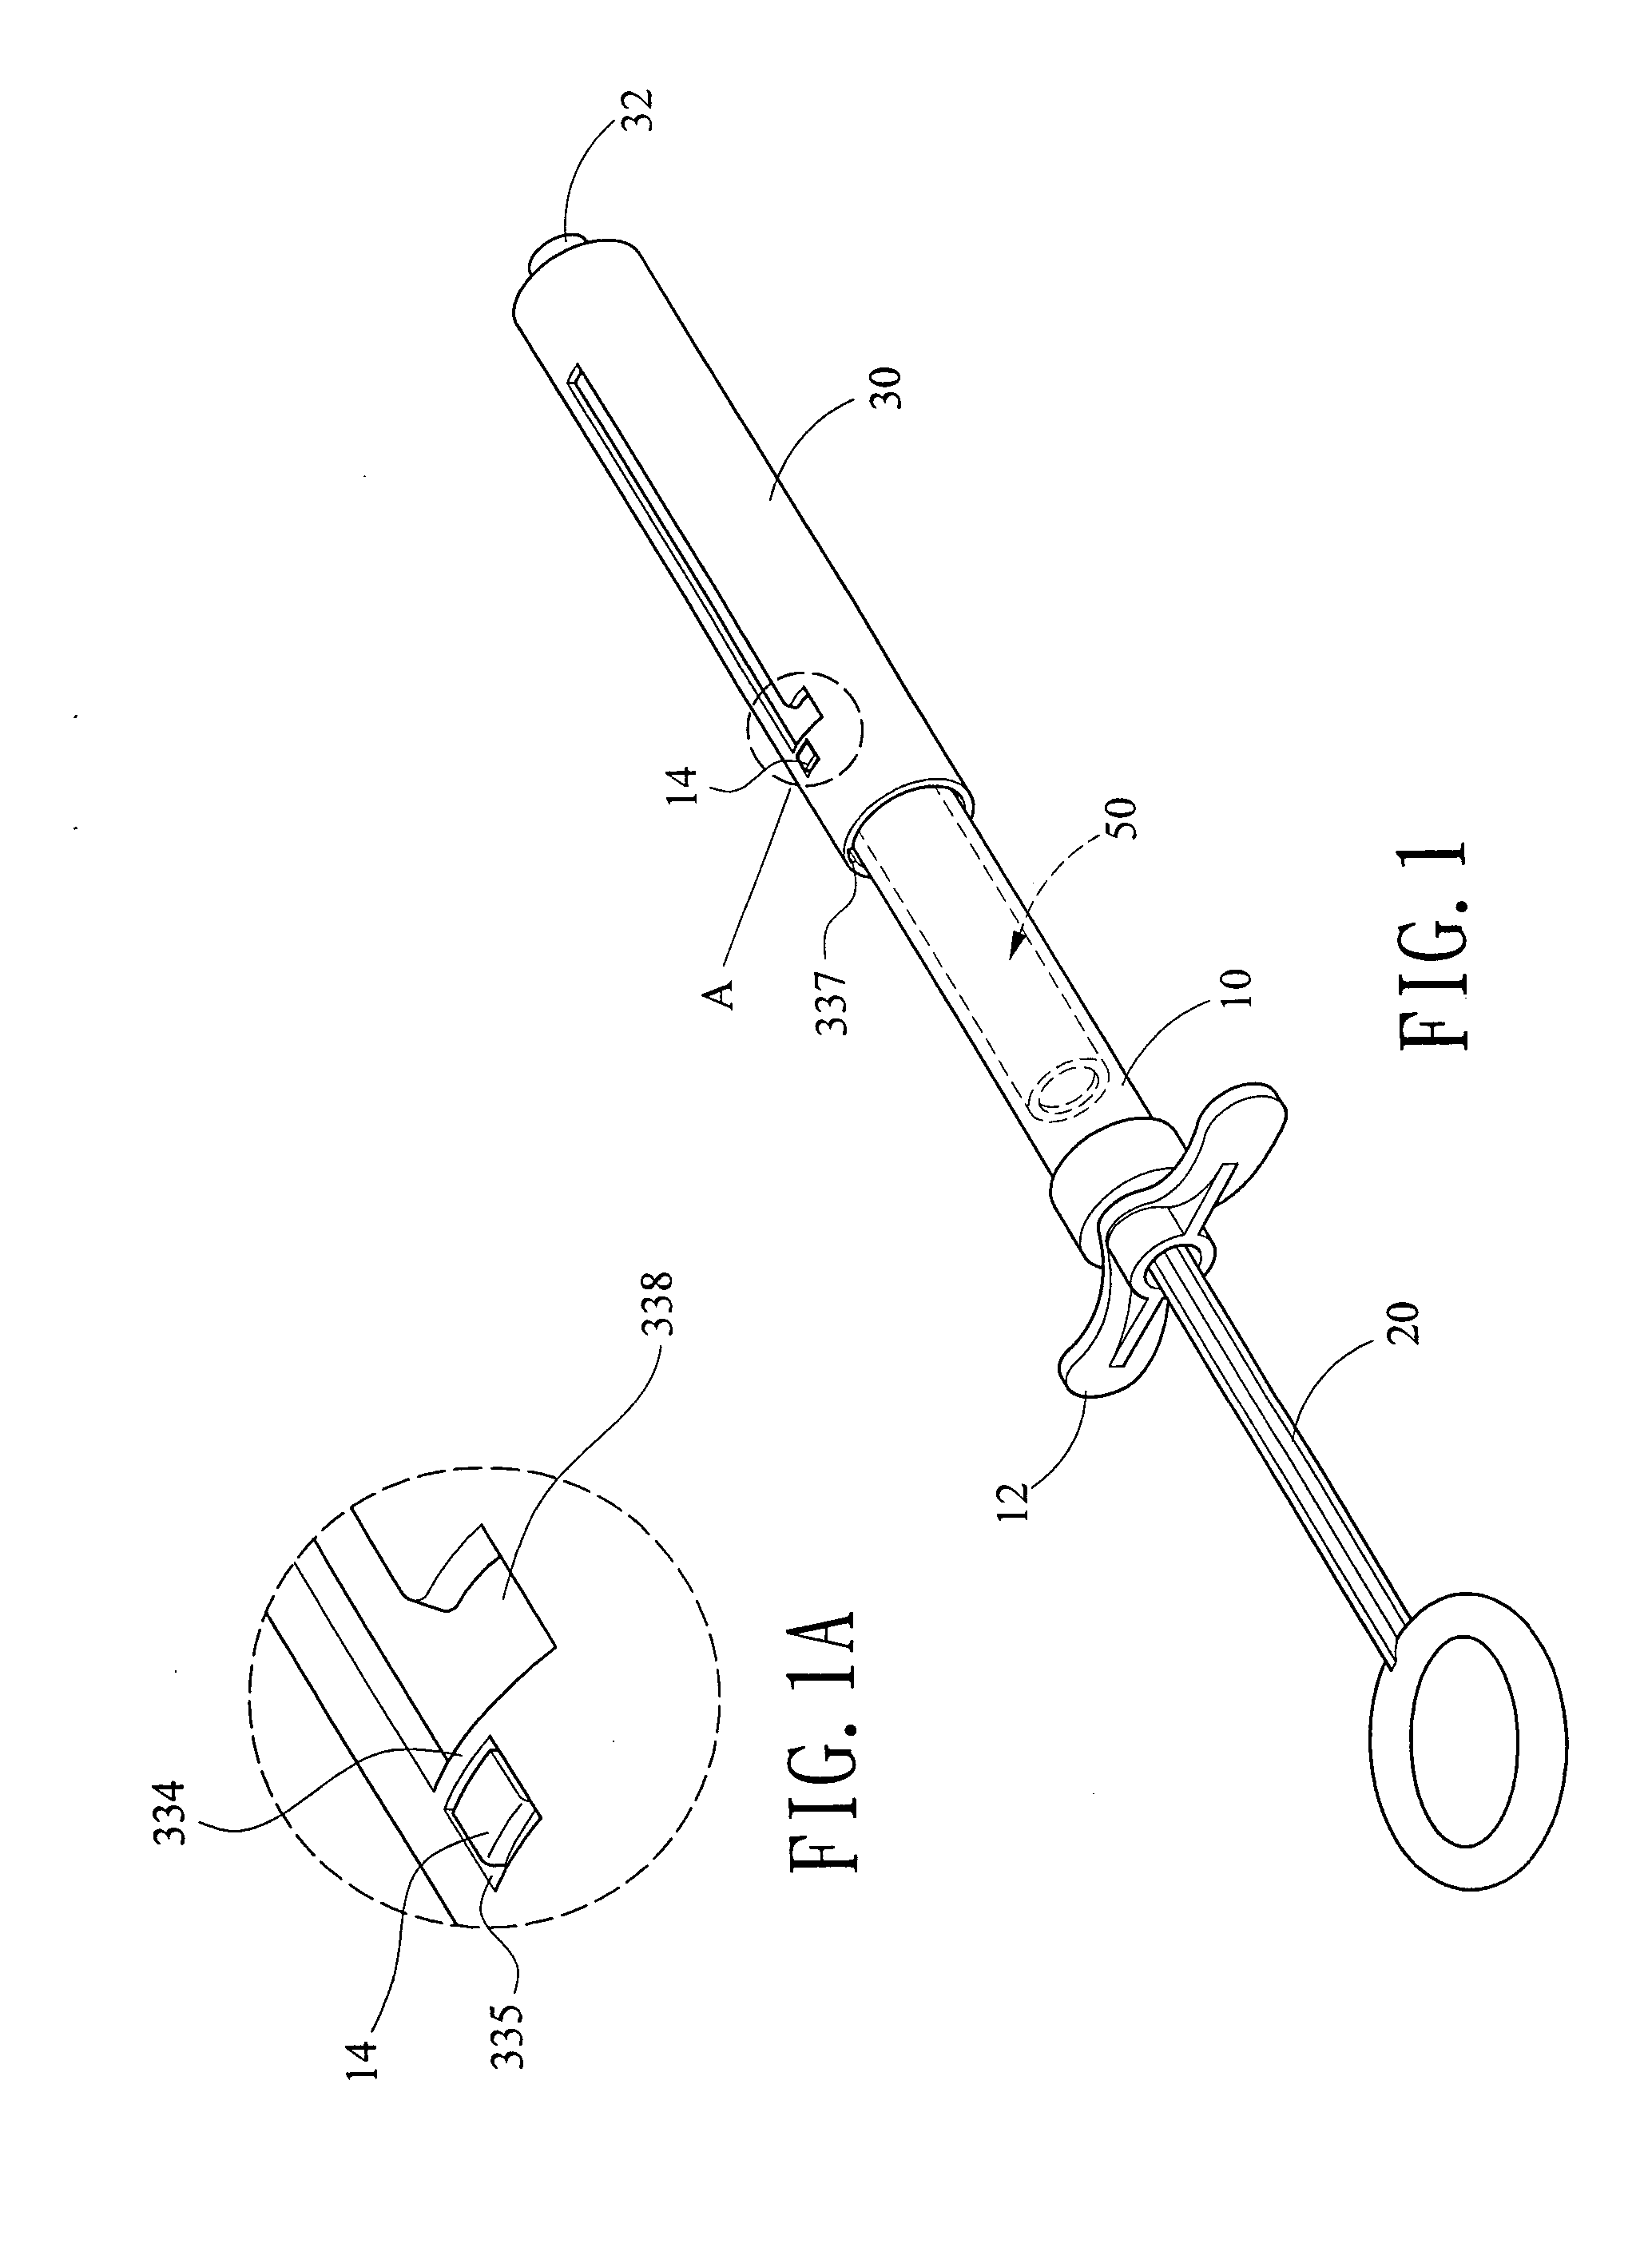 Disposable safety syringe for dispensing anesthetic